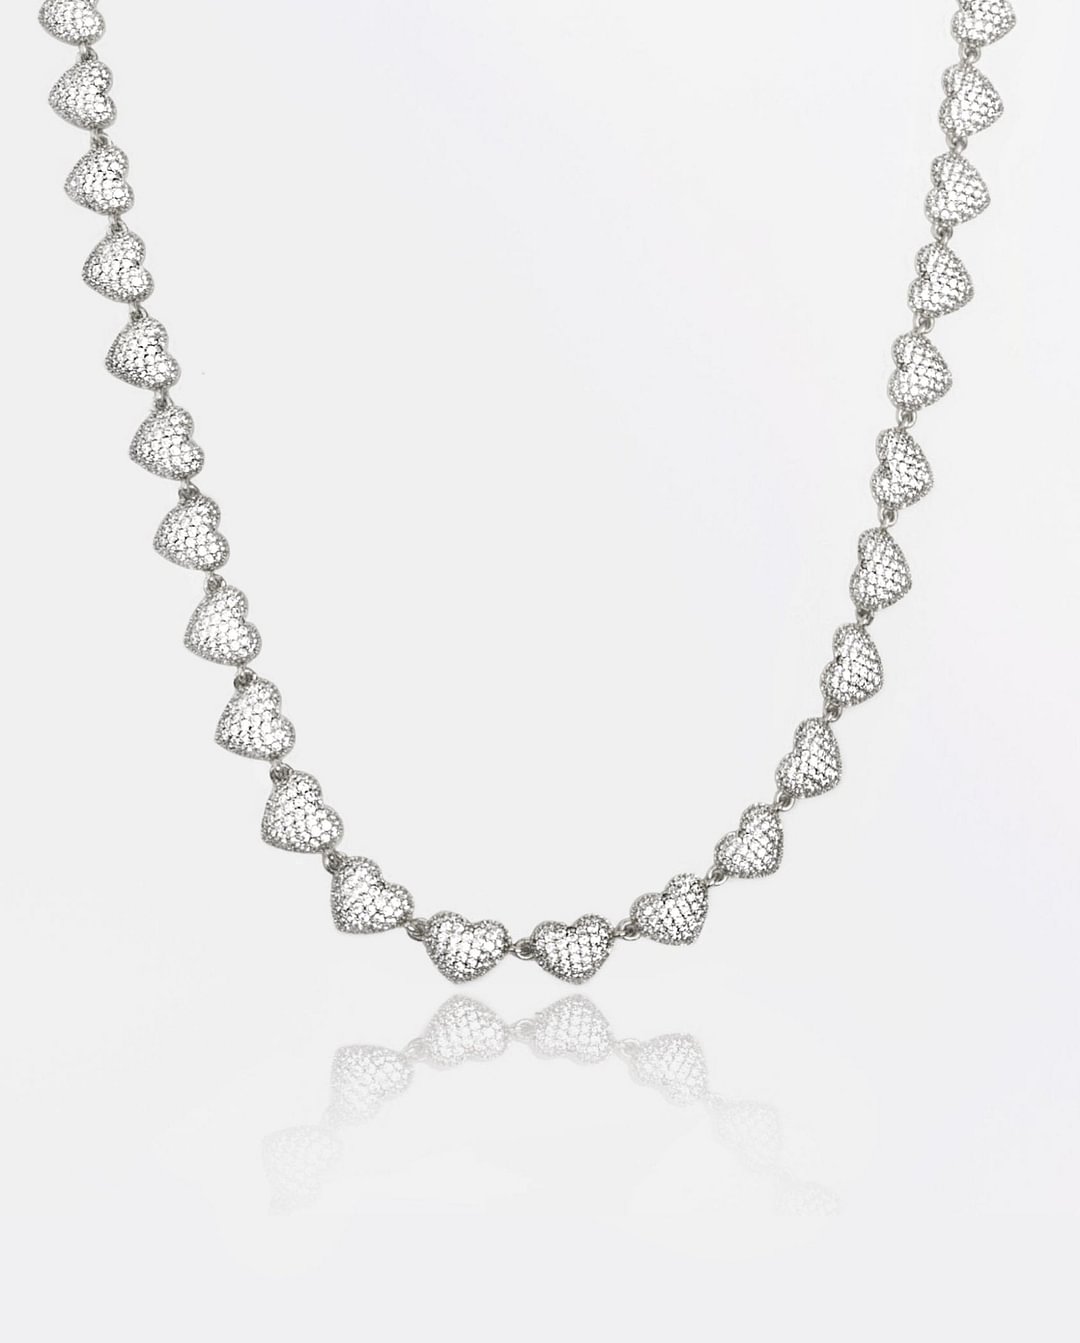 10mm Iced Heart Necklace - White Gold